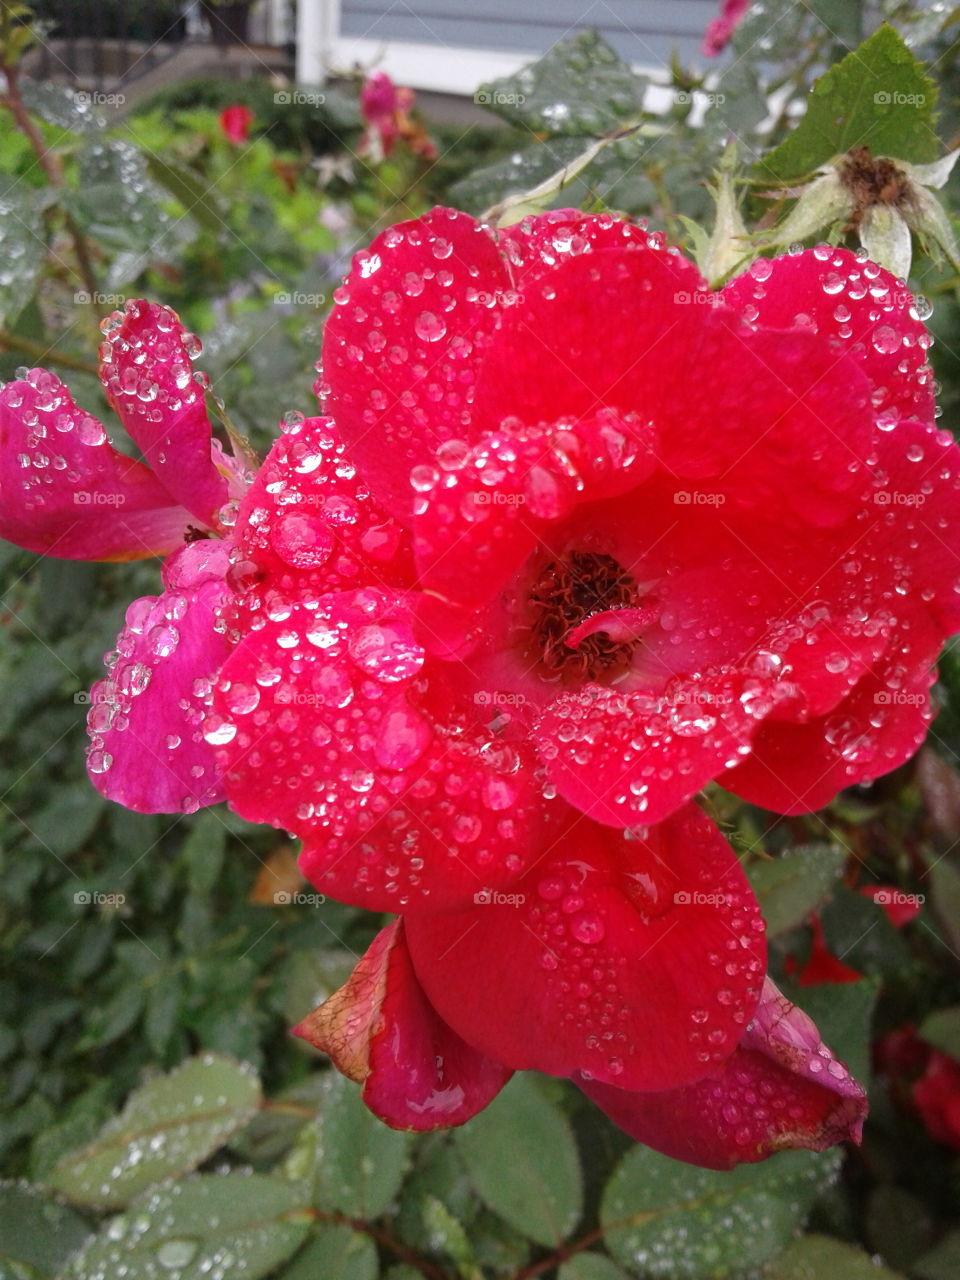 roses after a rainy day